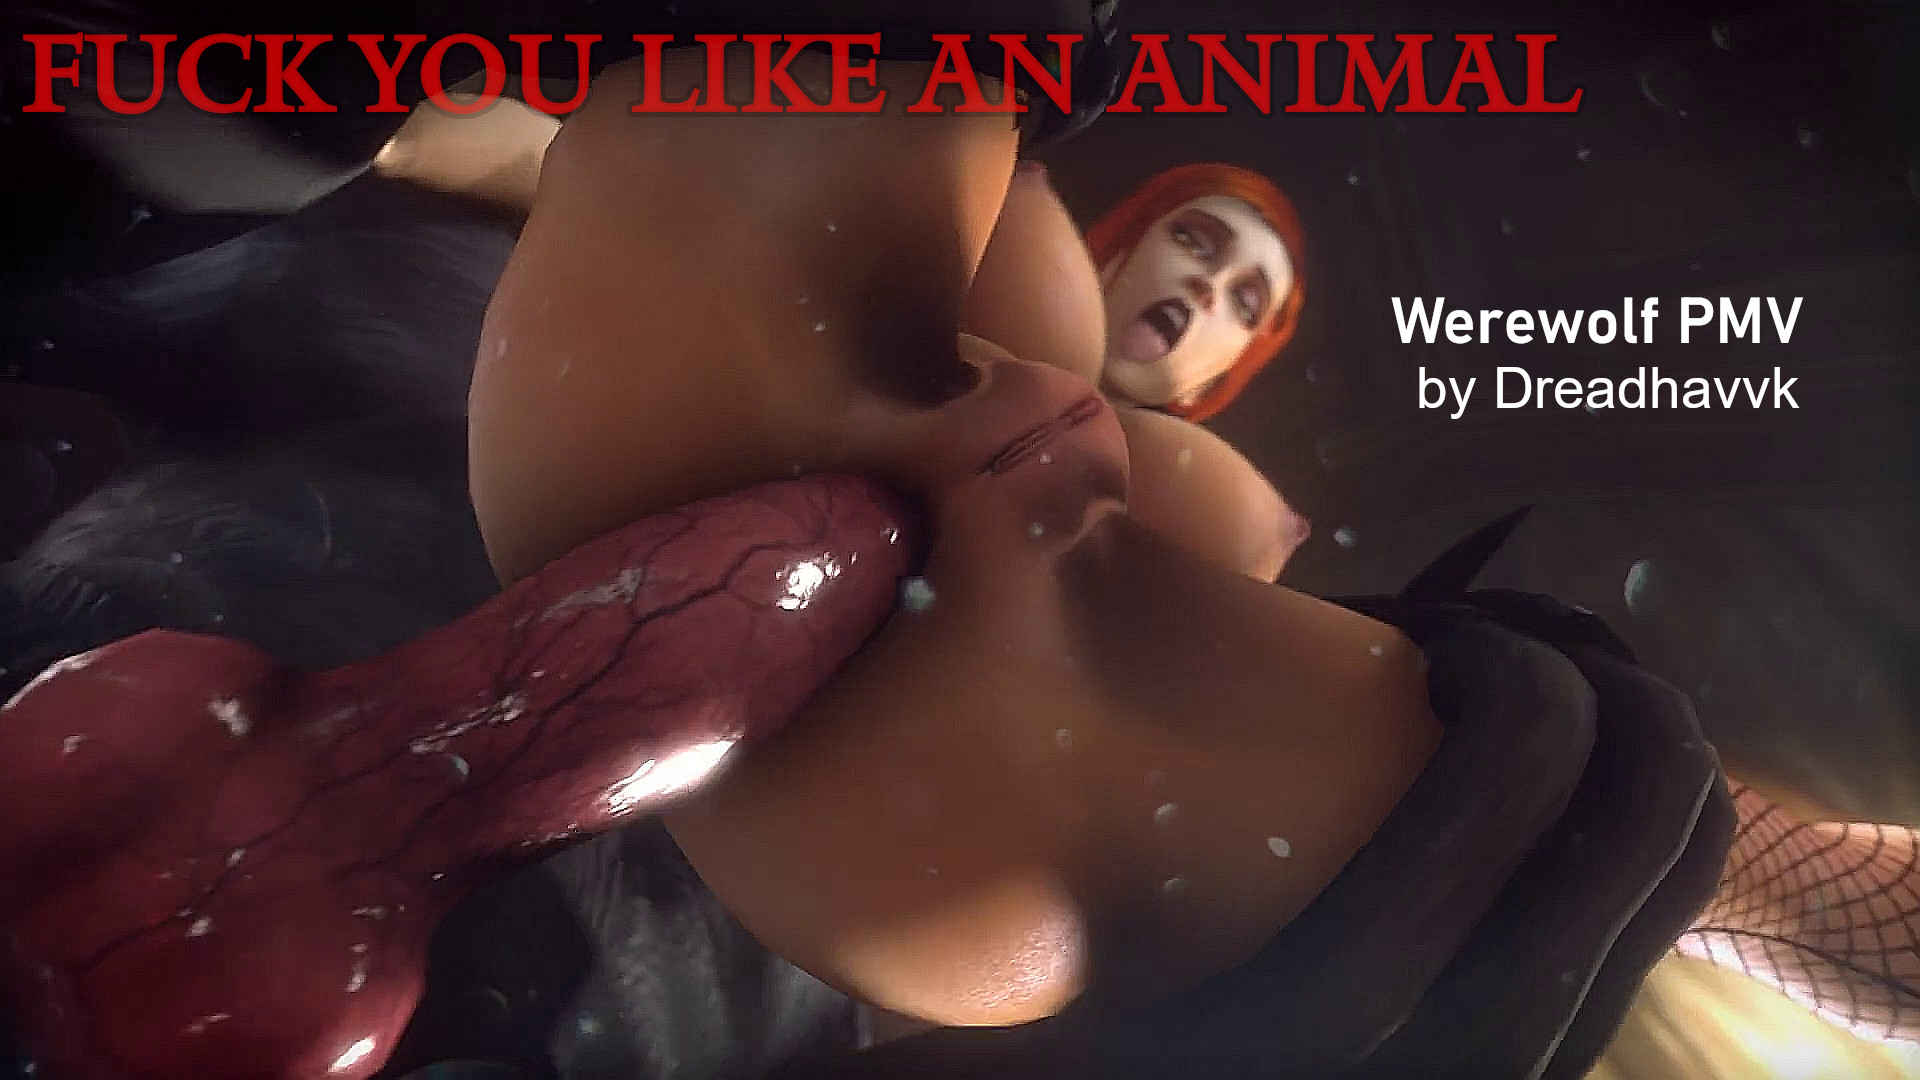 1920px x 1080px - SFM WEREWOLF COLLECTION - NINE INCH NAILS - FUCK YOU LIKE AN ANIMAL 1080p-  Dreadhavvk